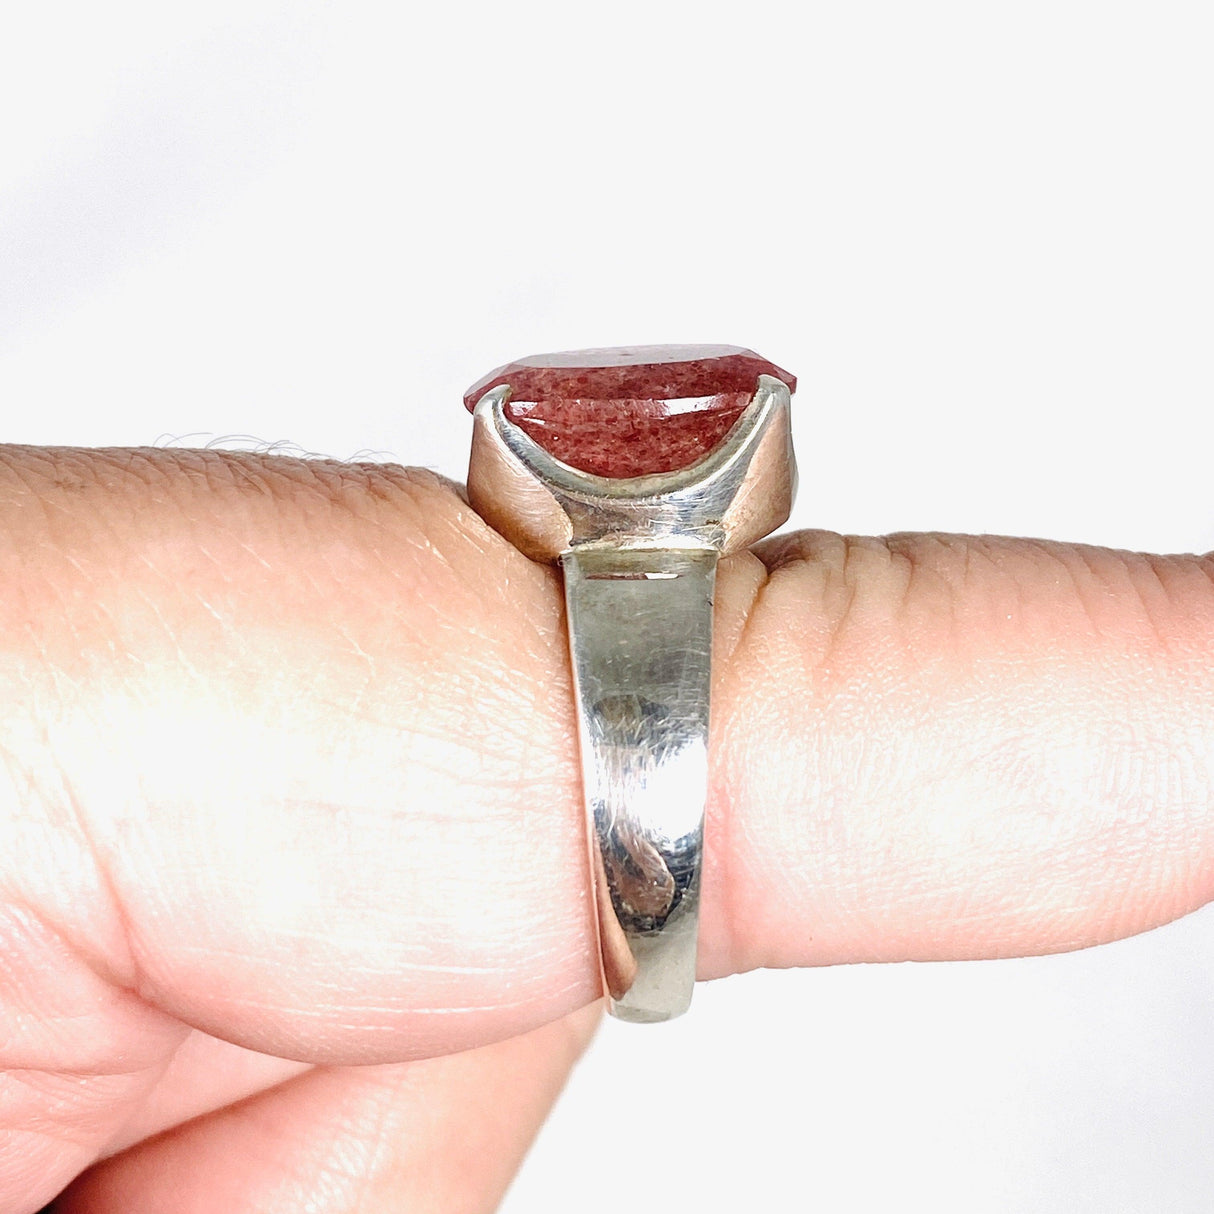 Strawberry quartz faceted oval ring s.9.5 PRGJ158 - Nature's Magick